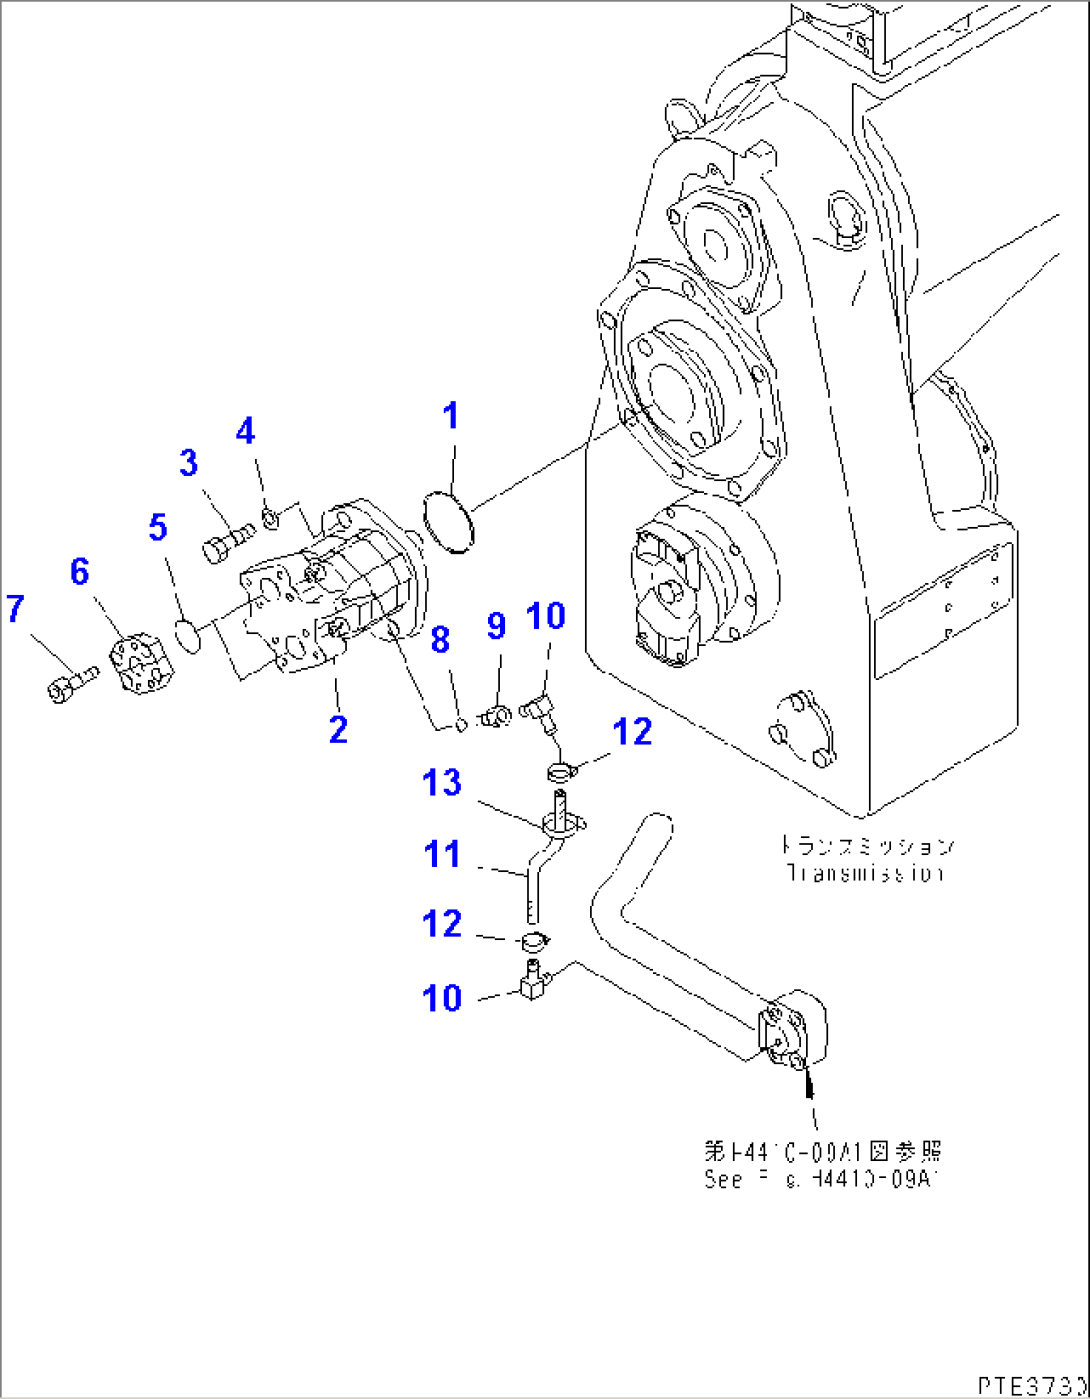 TORQUE CONVERTER AND TRANSMISSION (PUMP AND DRAIN PIPING) (WITH EMERGENCY STEERING)